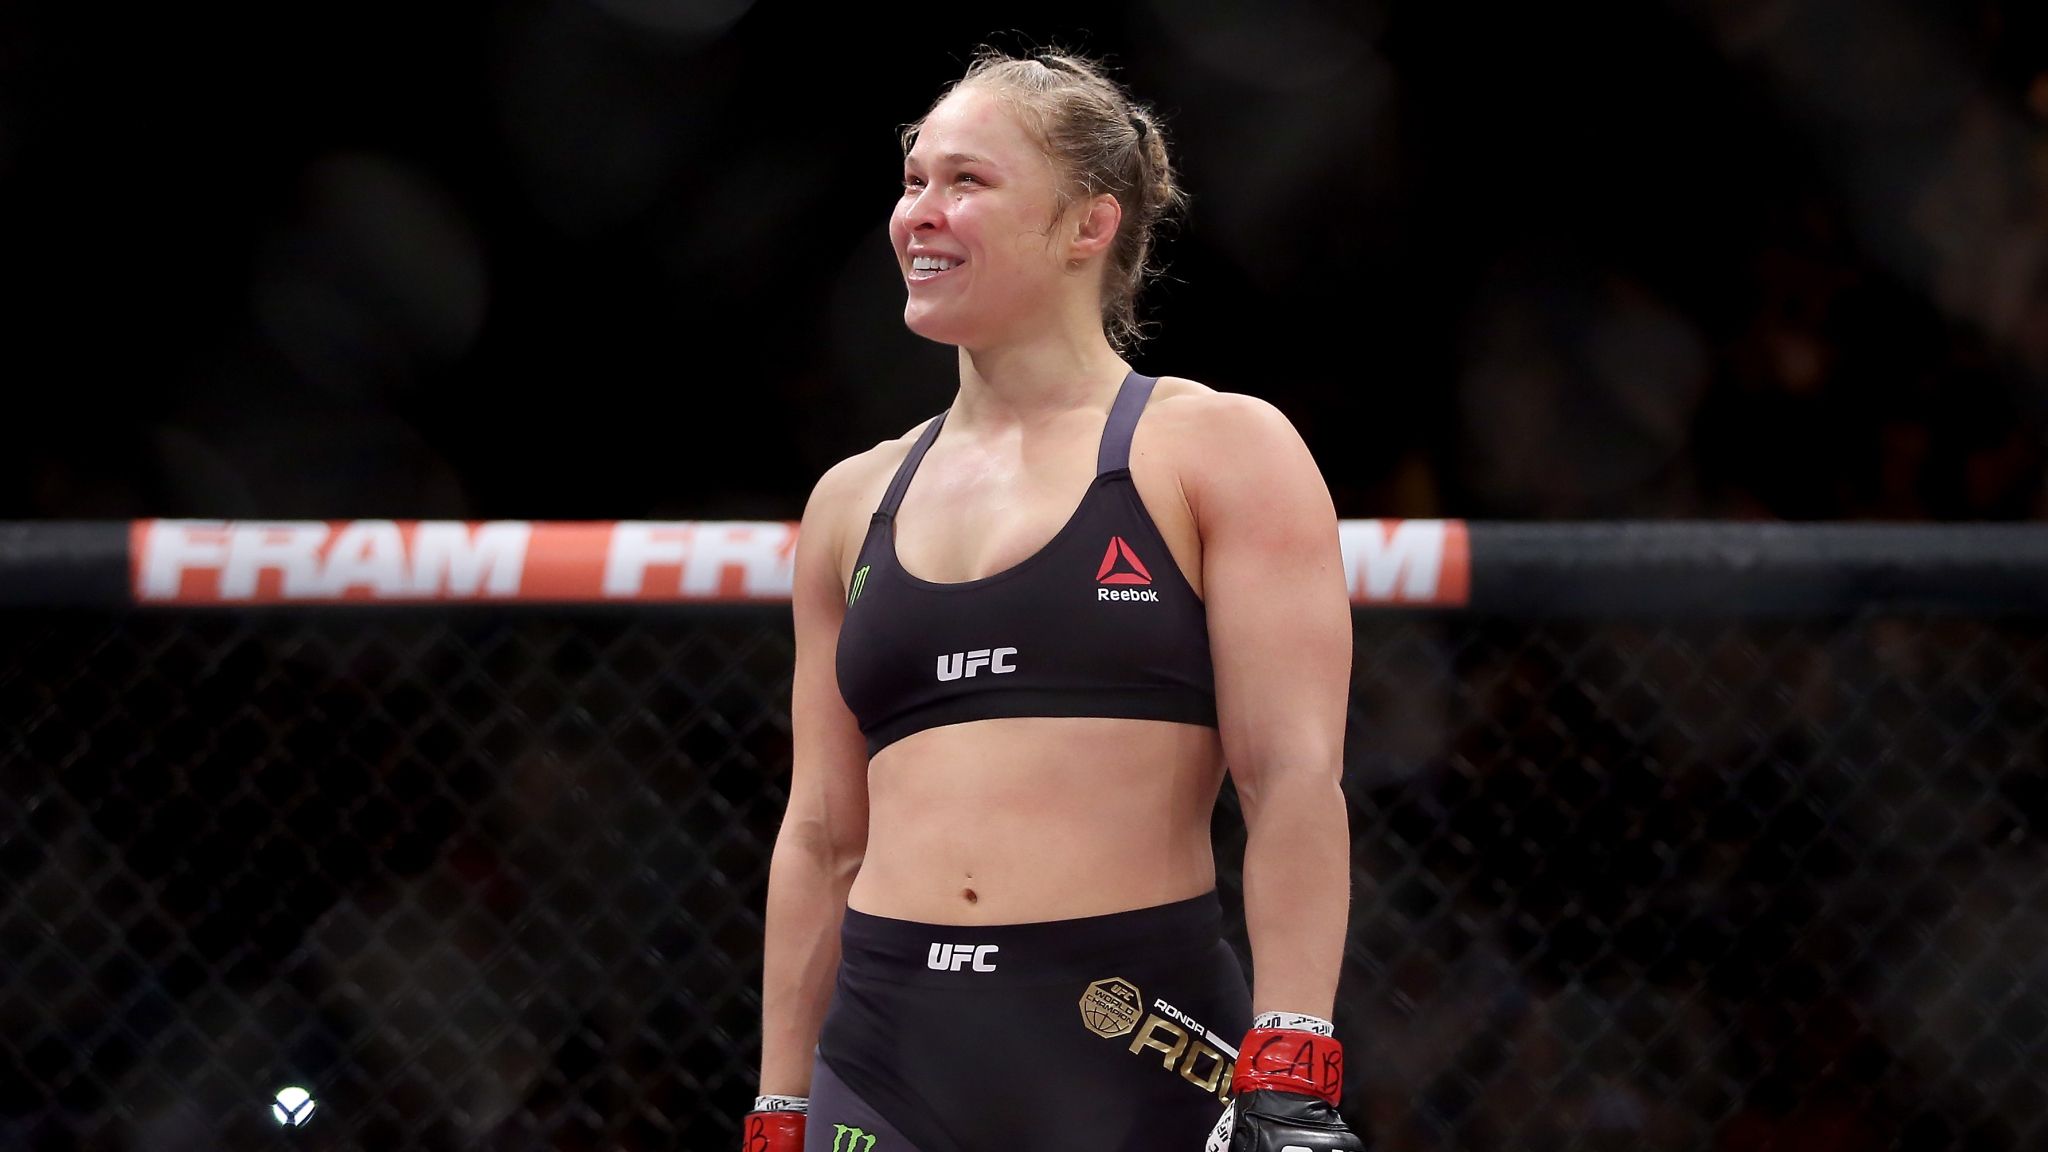 Ronda Rousey wins in just 34 seconds at UFC 190 in Rio